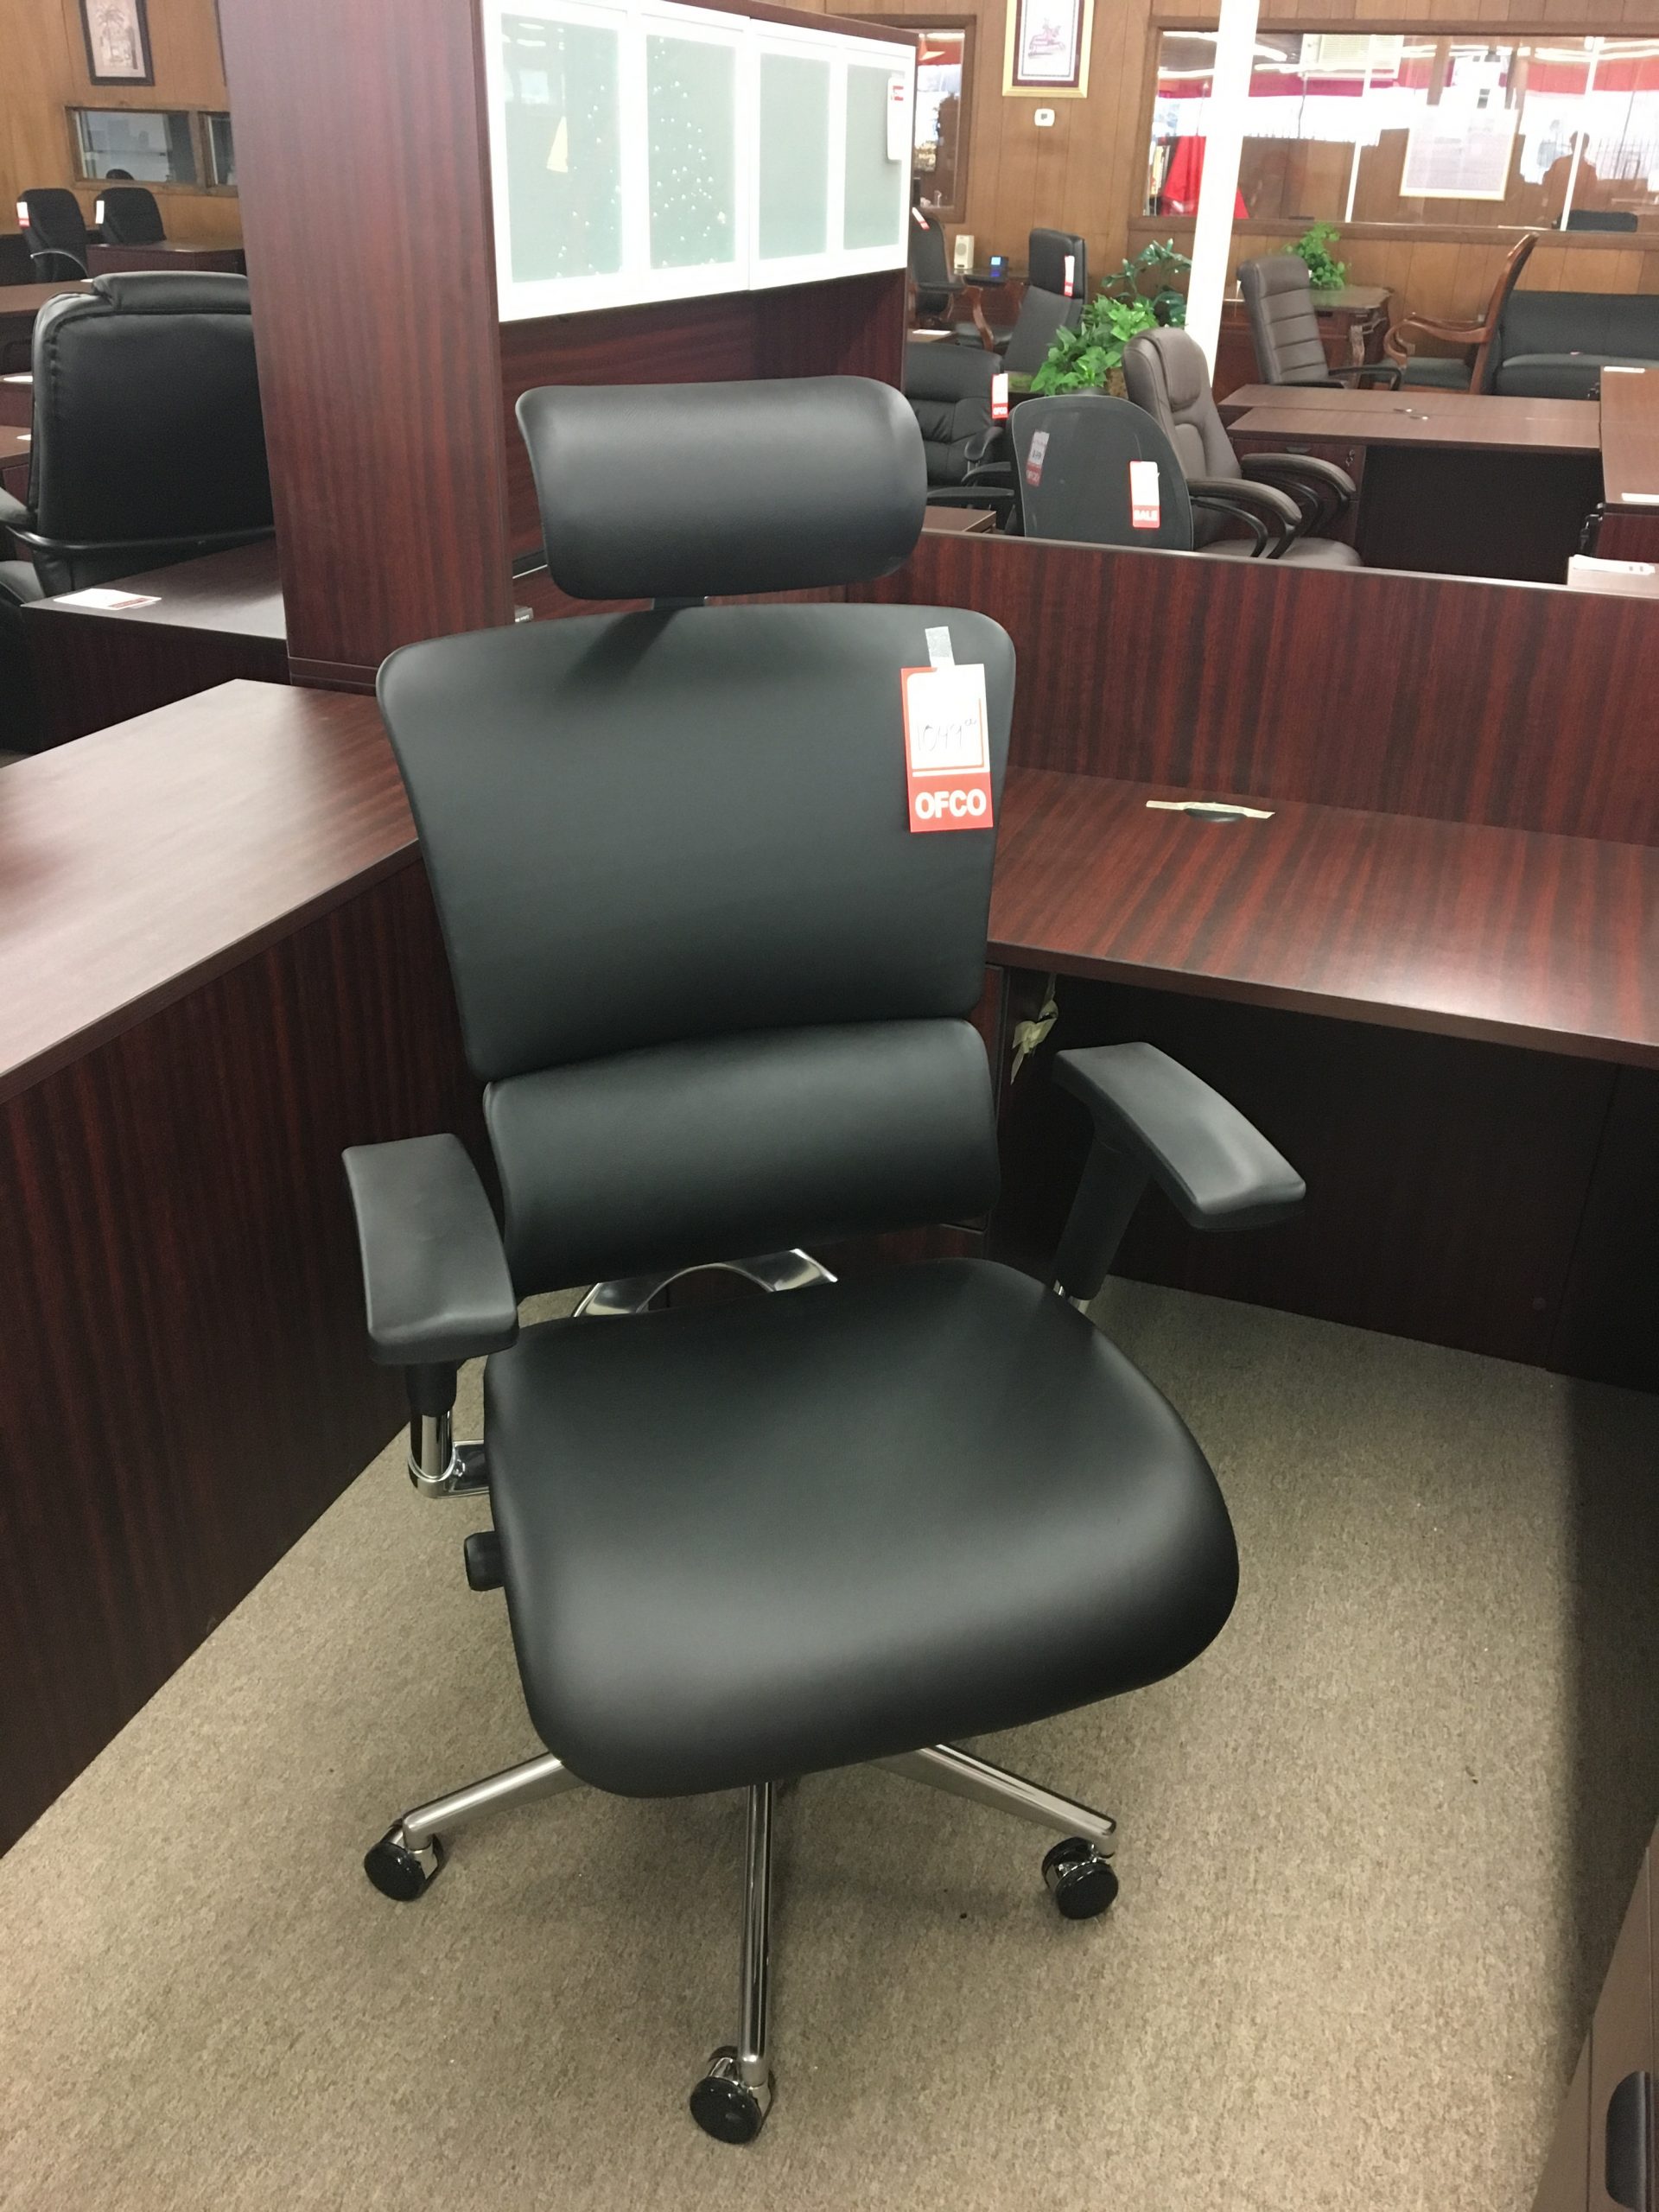 X4 Leather Executive Office Chair